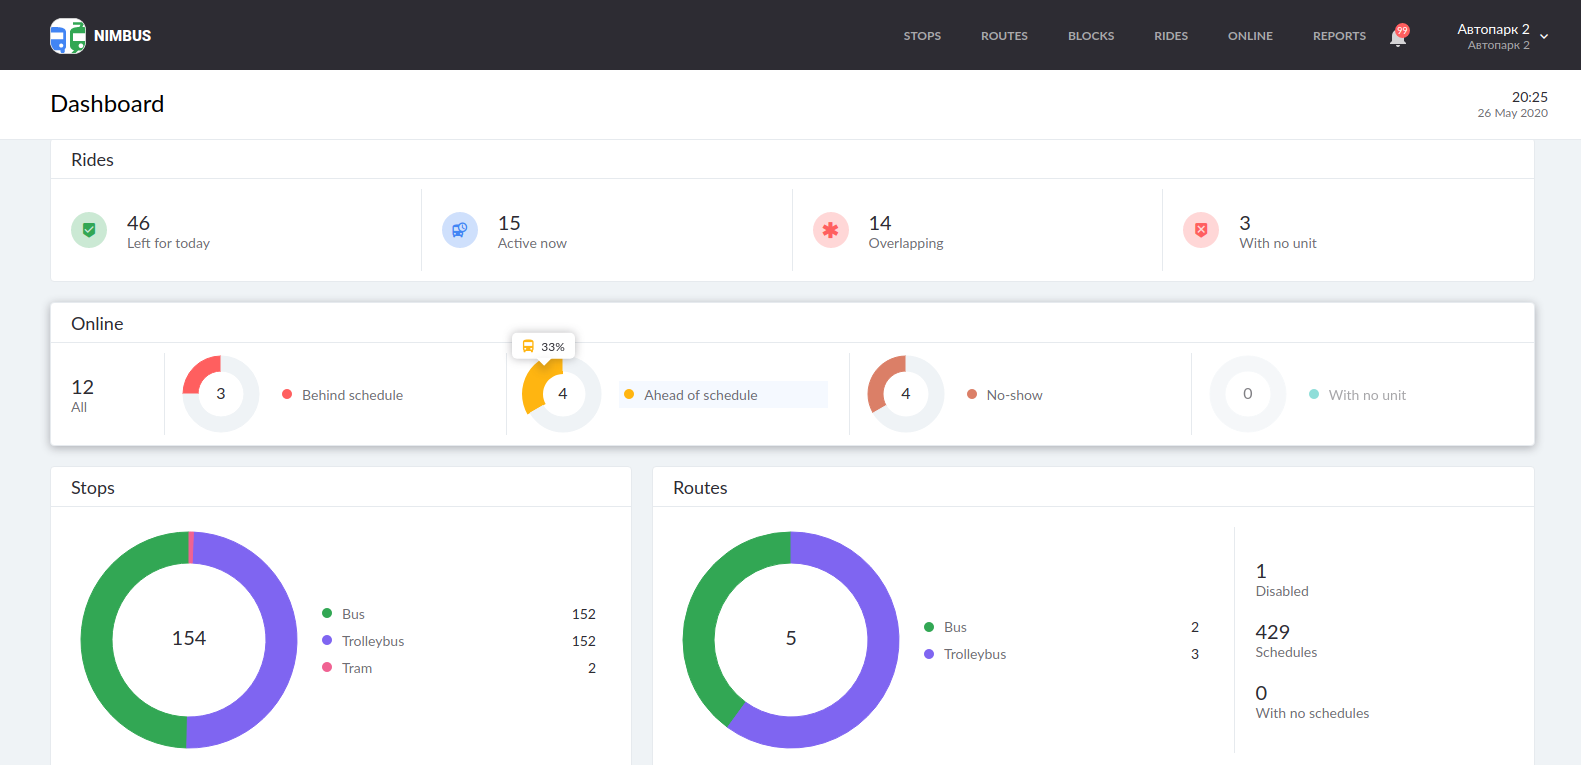 New NimBus feature: actions on the Dashboard page